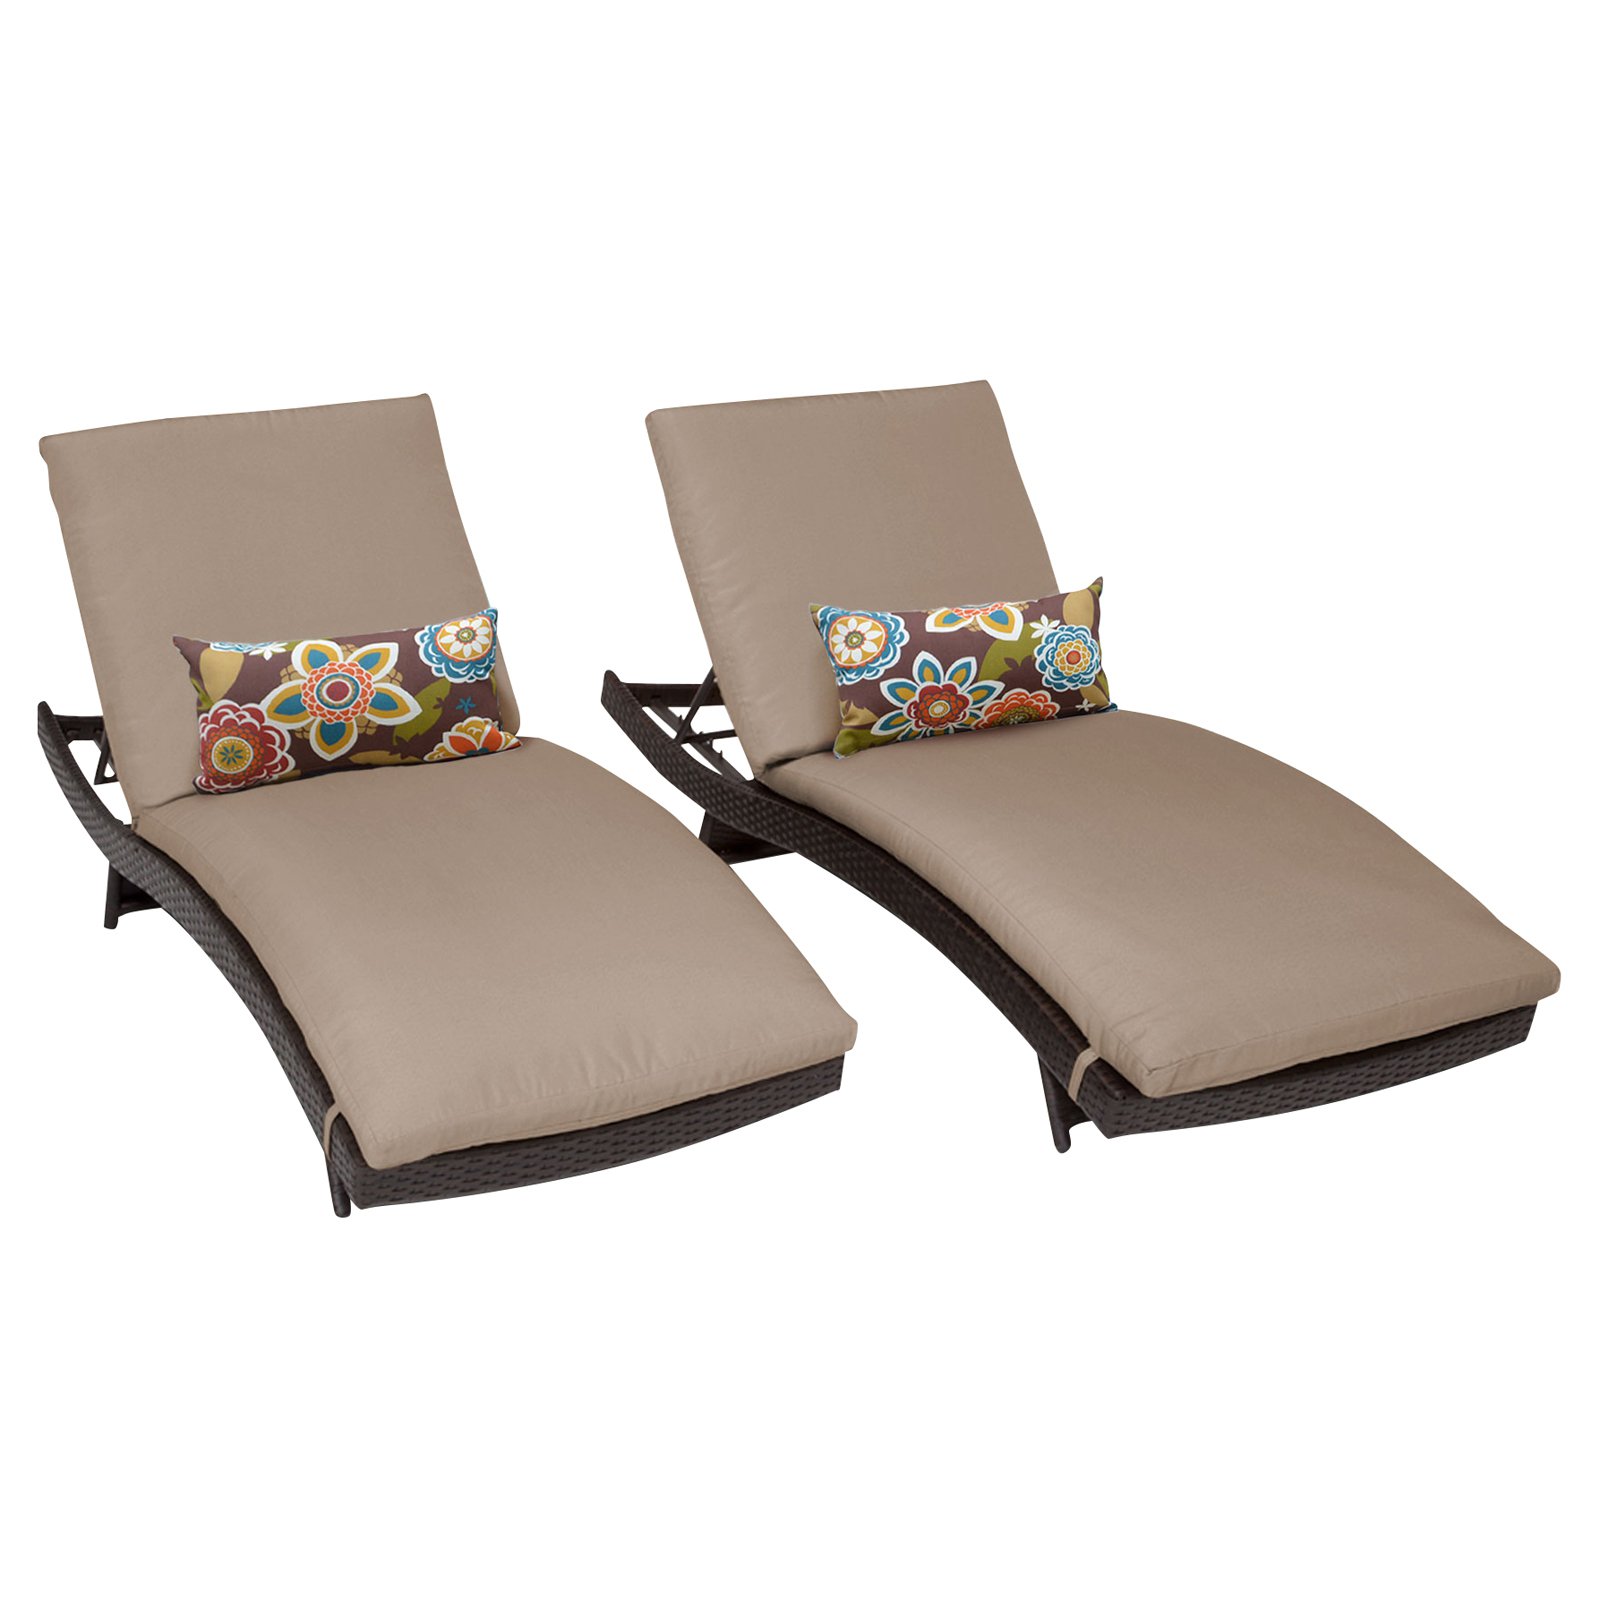 Barbados Curved Chaise Outdoor Wicker Patio Furniture in White (Set of 2) - image 2 of 4